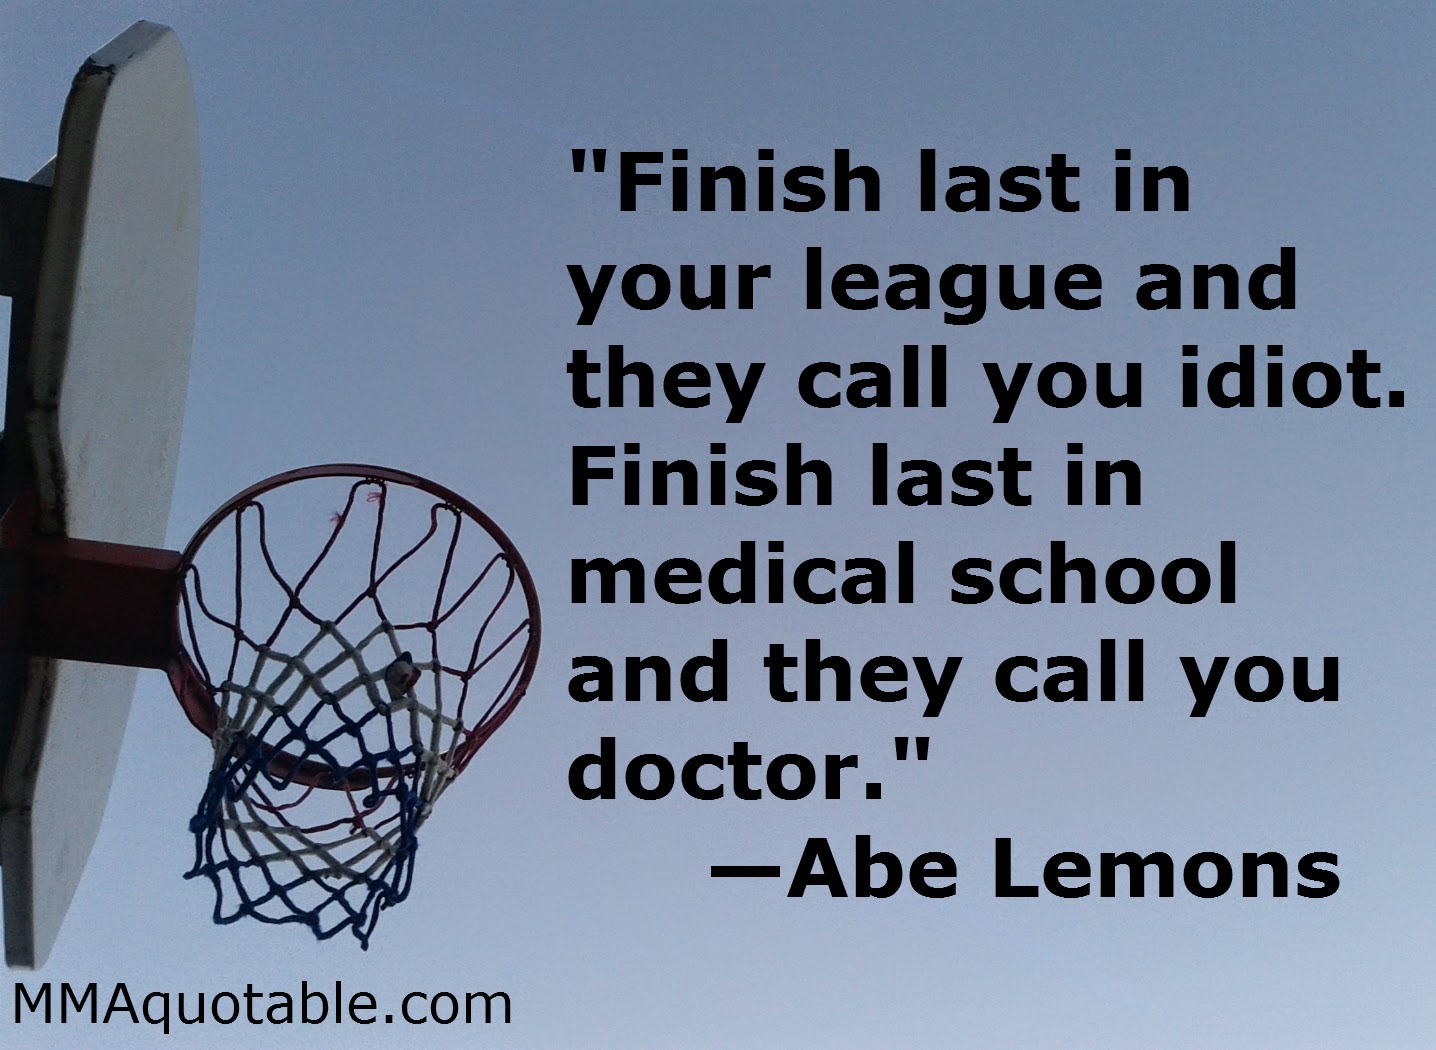 Finish last in medical school and they call you doctor " —Abe Lemons